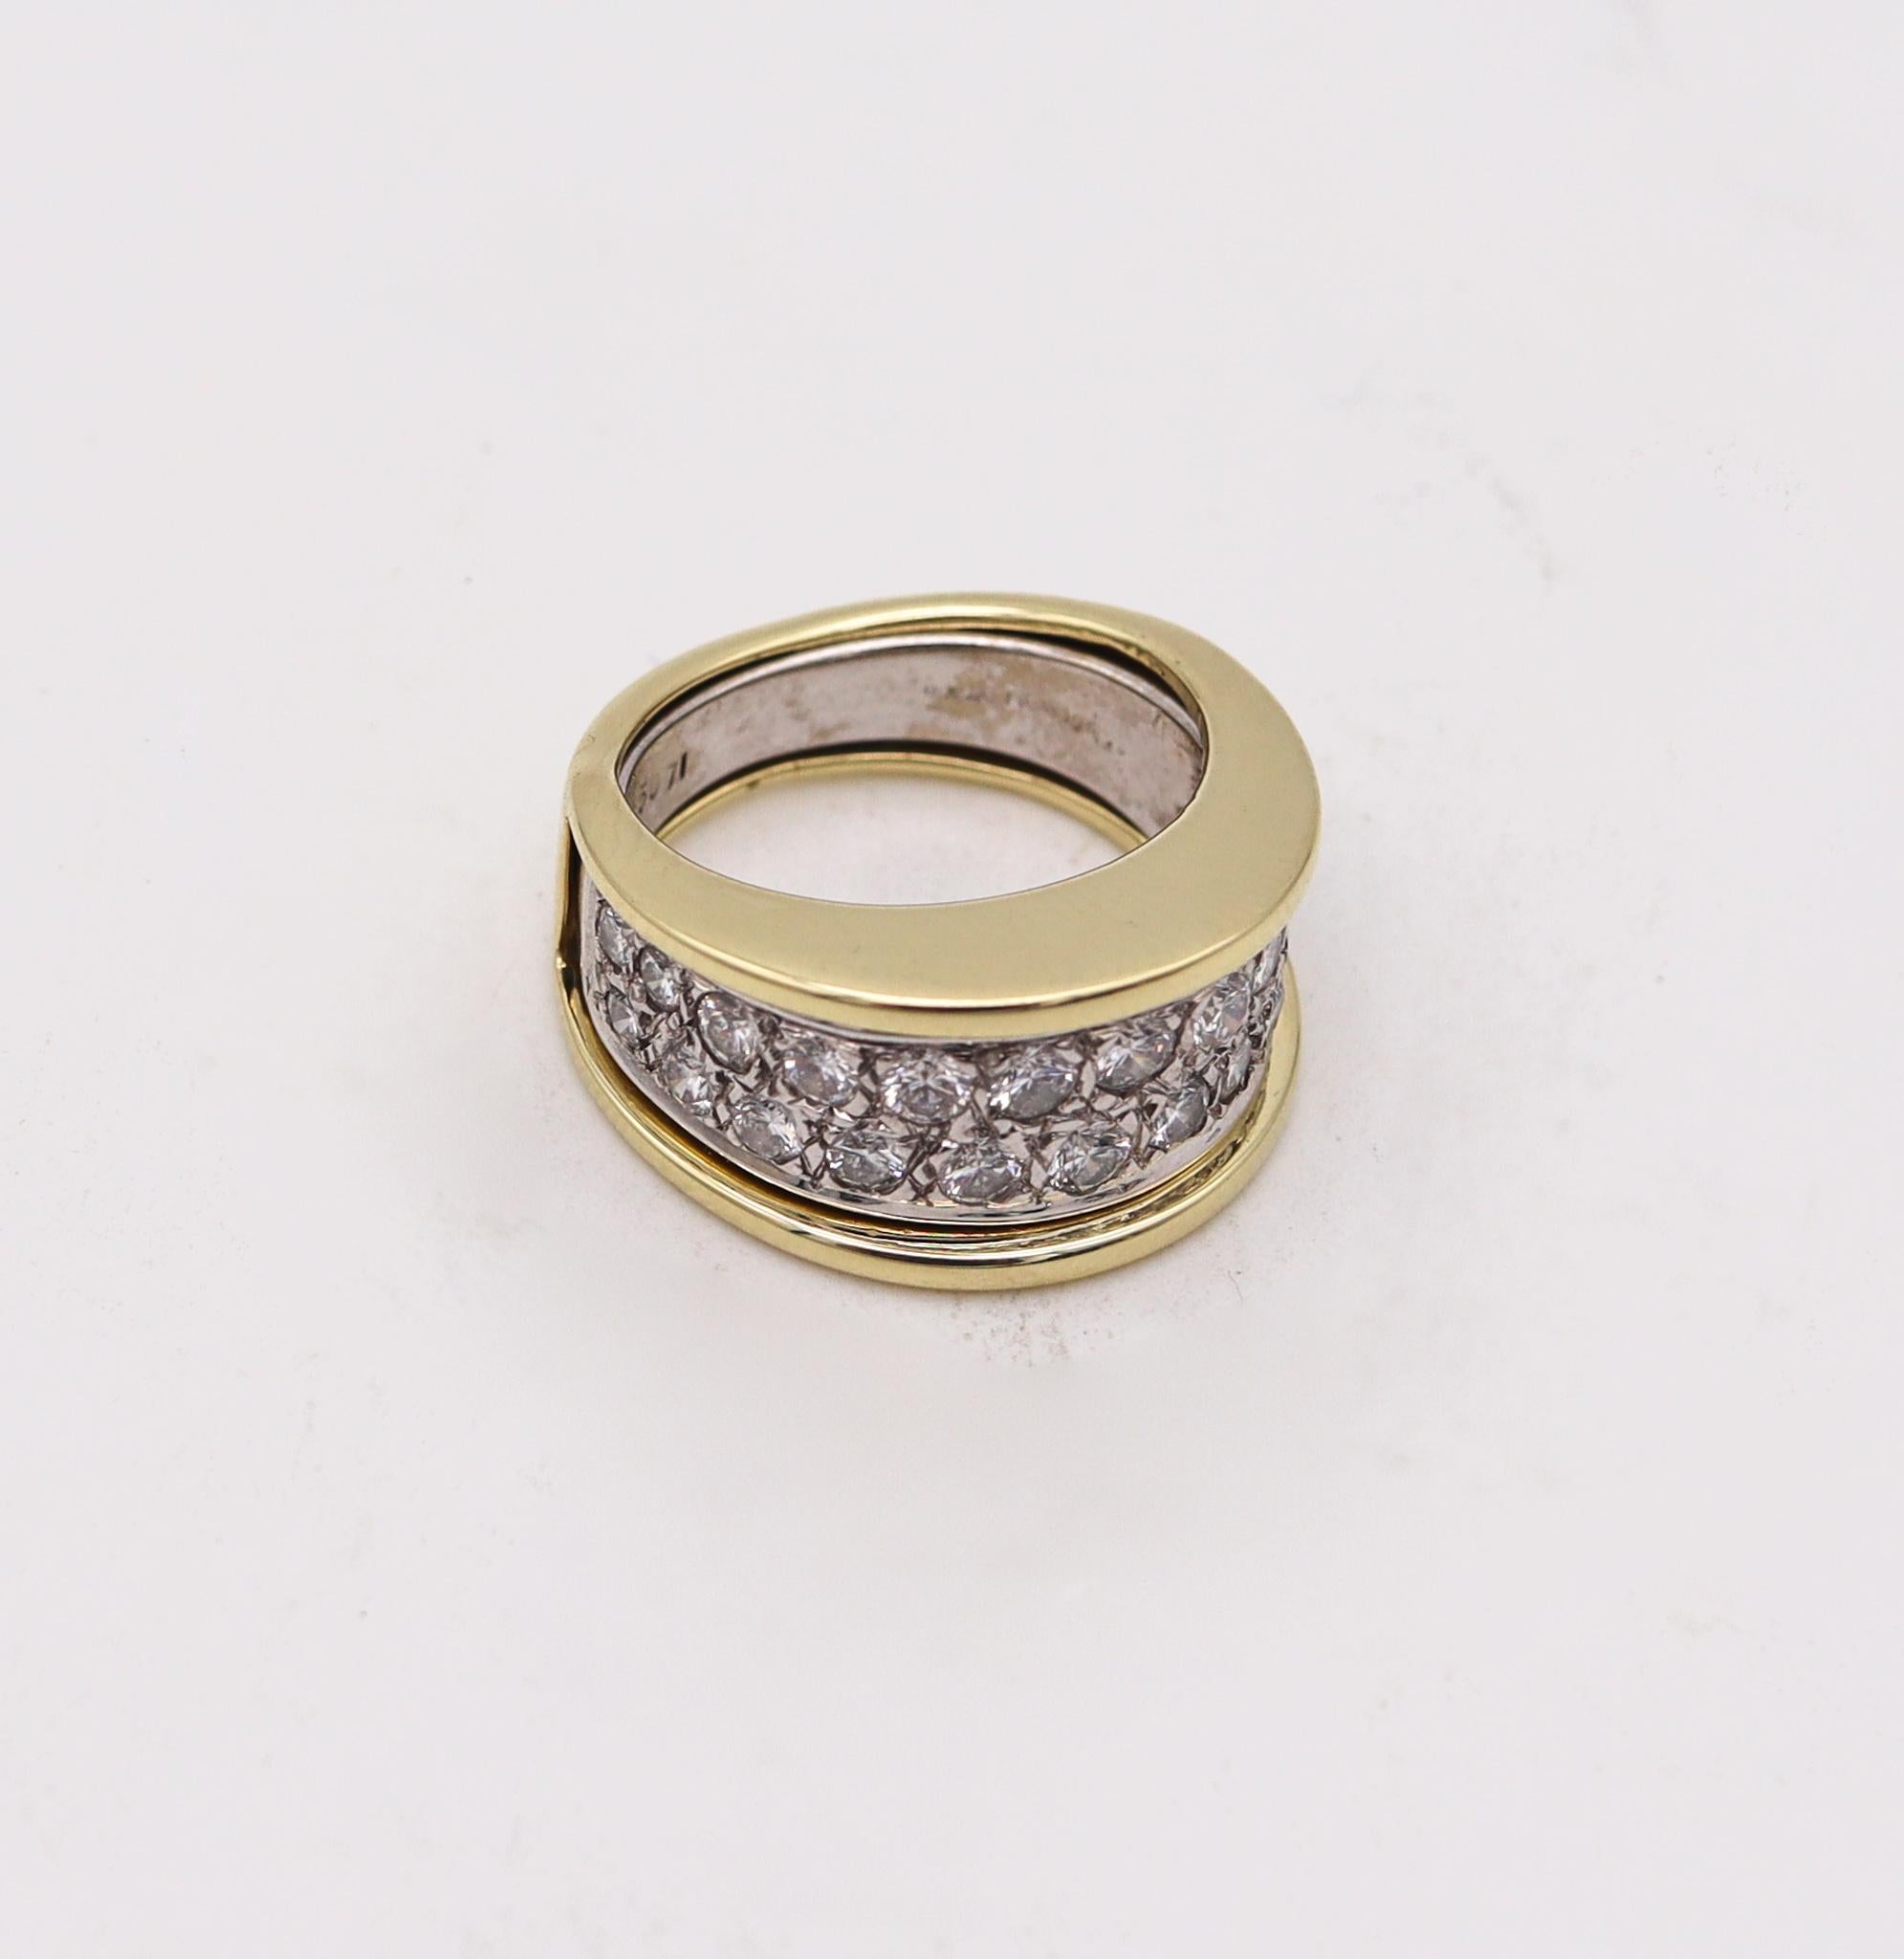 Brilliant Cut Jose Hess Convertible Two Tones Ring In 14Kt Gold With 1.80 Ctw In VS Diamonds